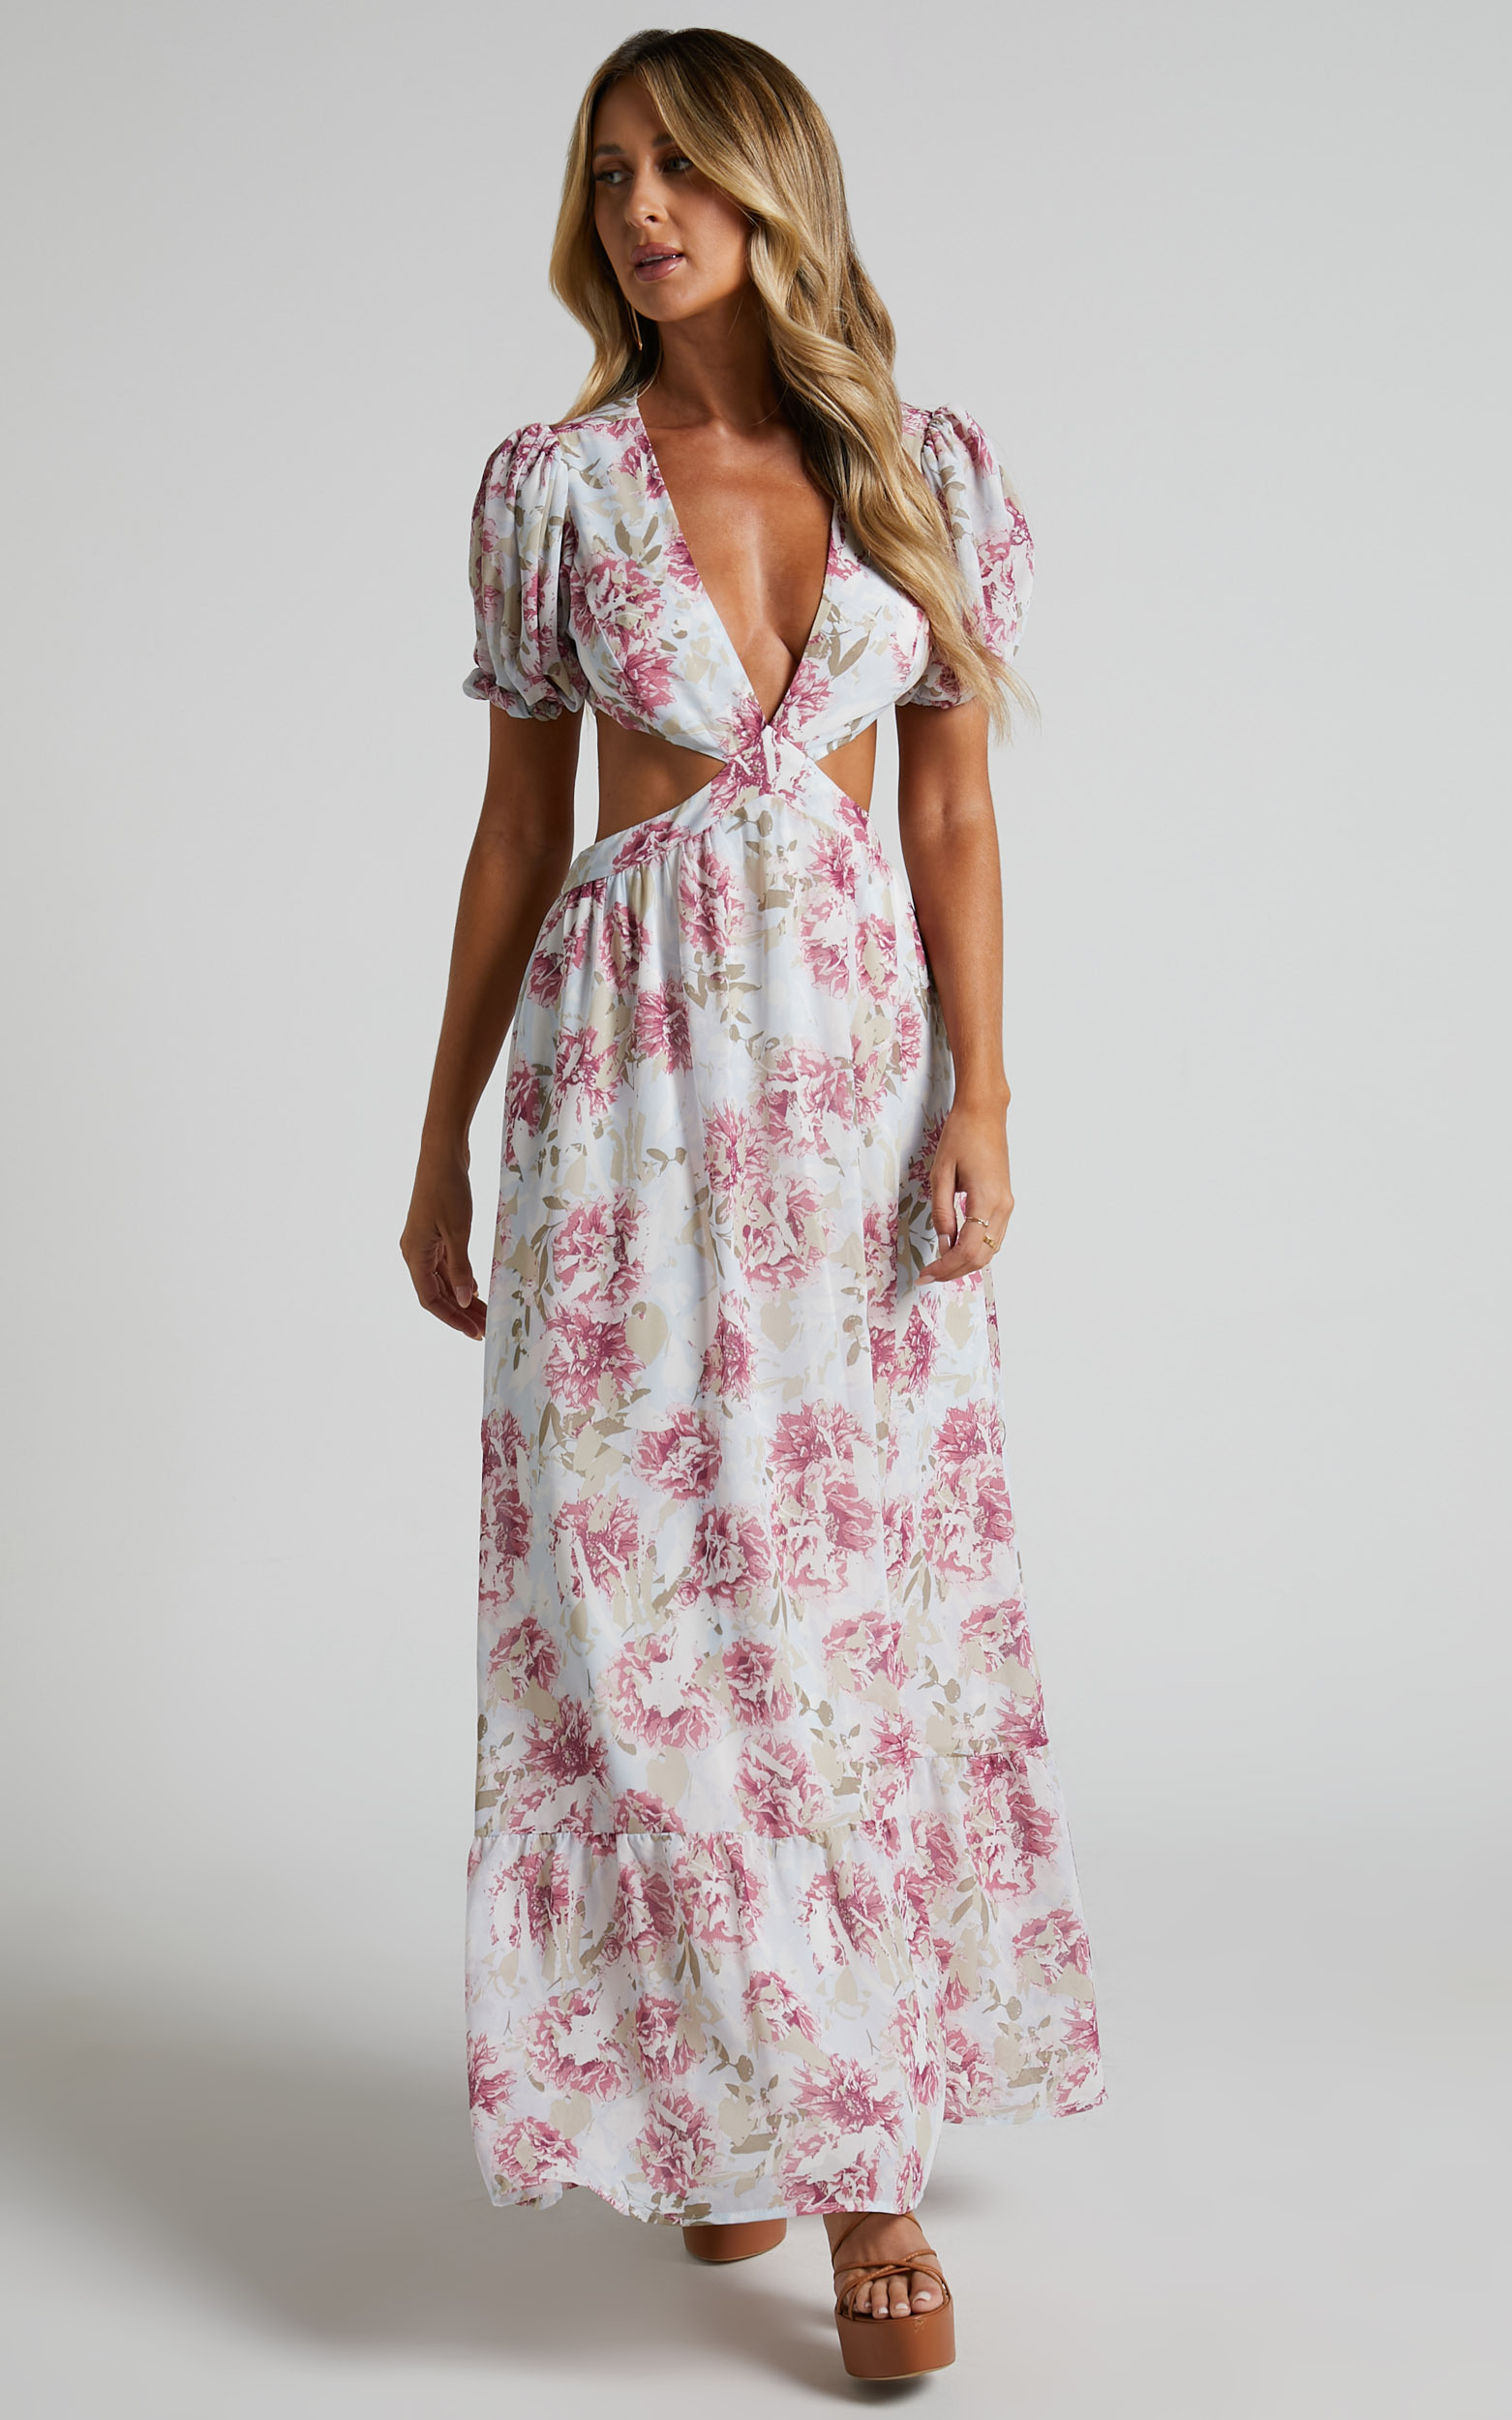 Addy Side Cut Out Balloon Sleeve Maxi Dress in White Floral - 06, WHT1, hi-res image number null